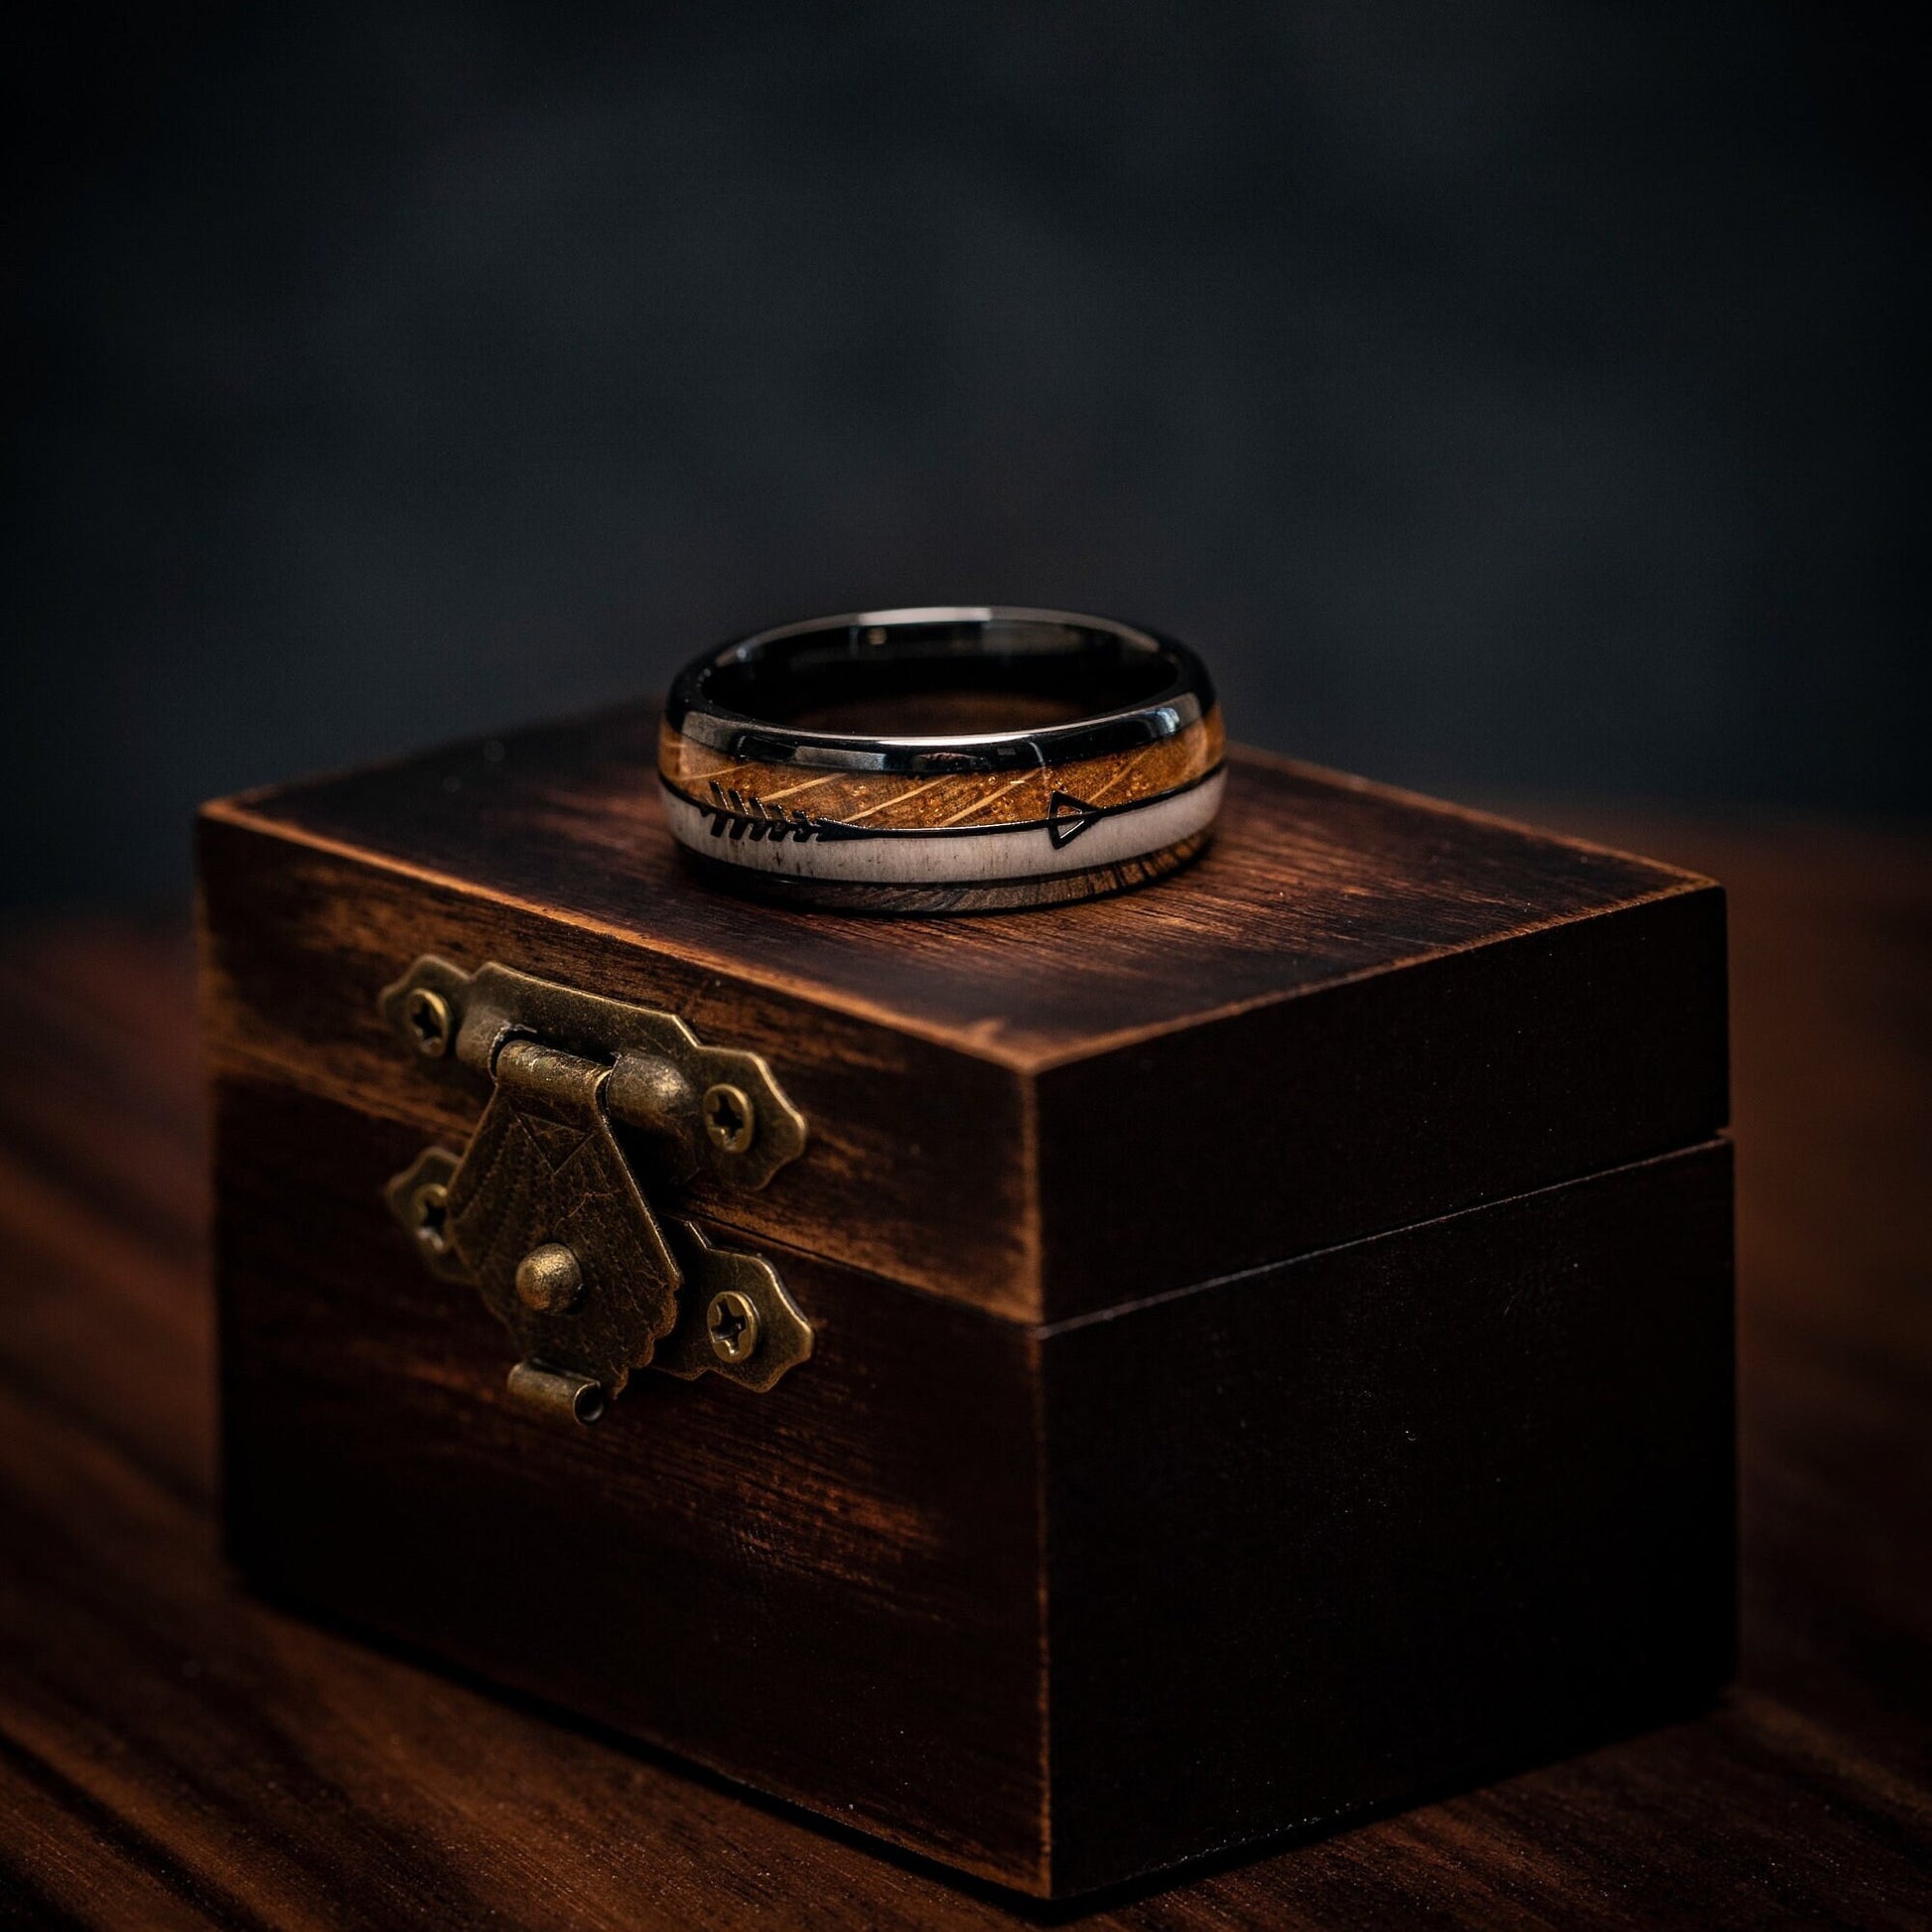 Elegant 8mm wedding ring with deer antler and wood inlay, ideal for engagements.